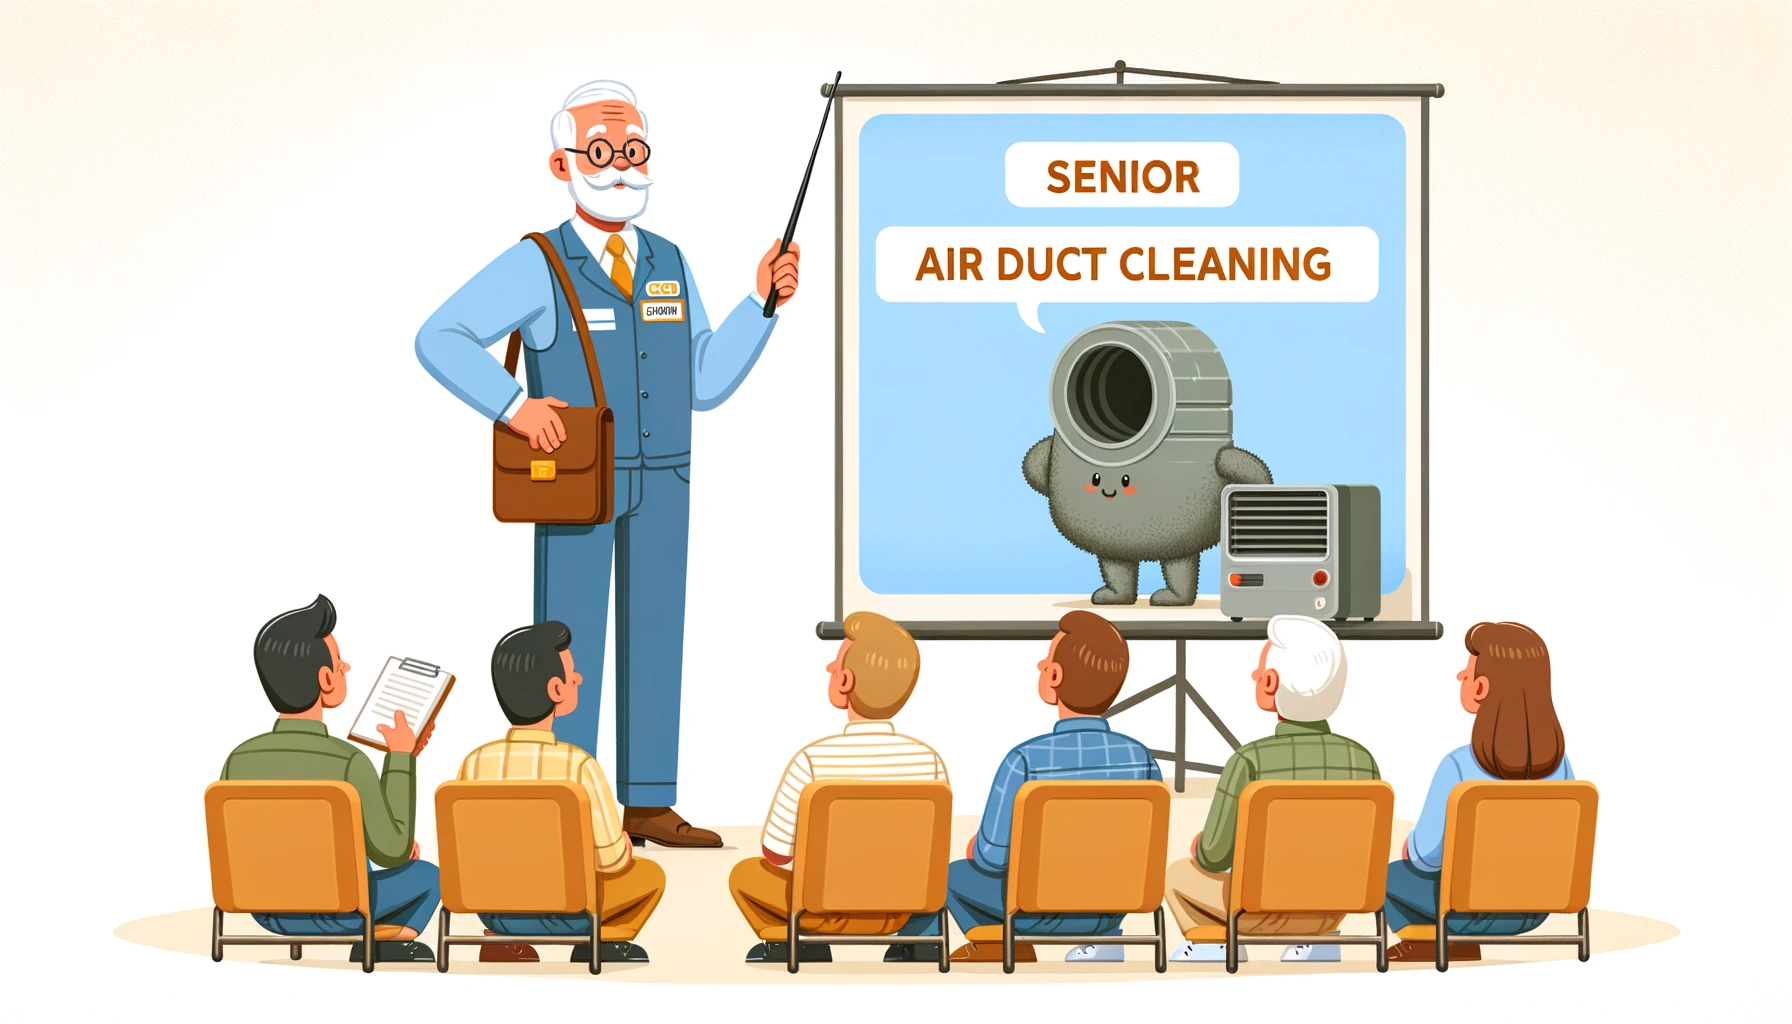 Inside Air Duct Cleaning: A Retired Technician’s Perspective